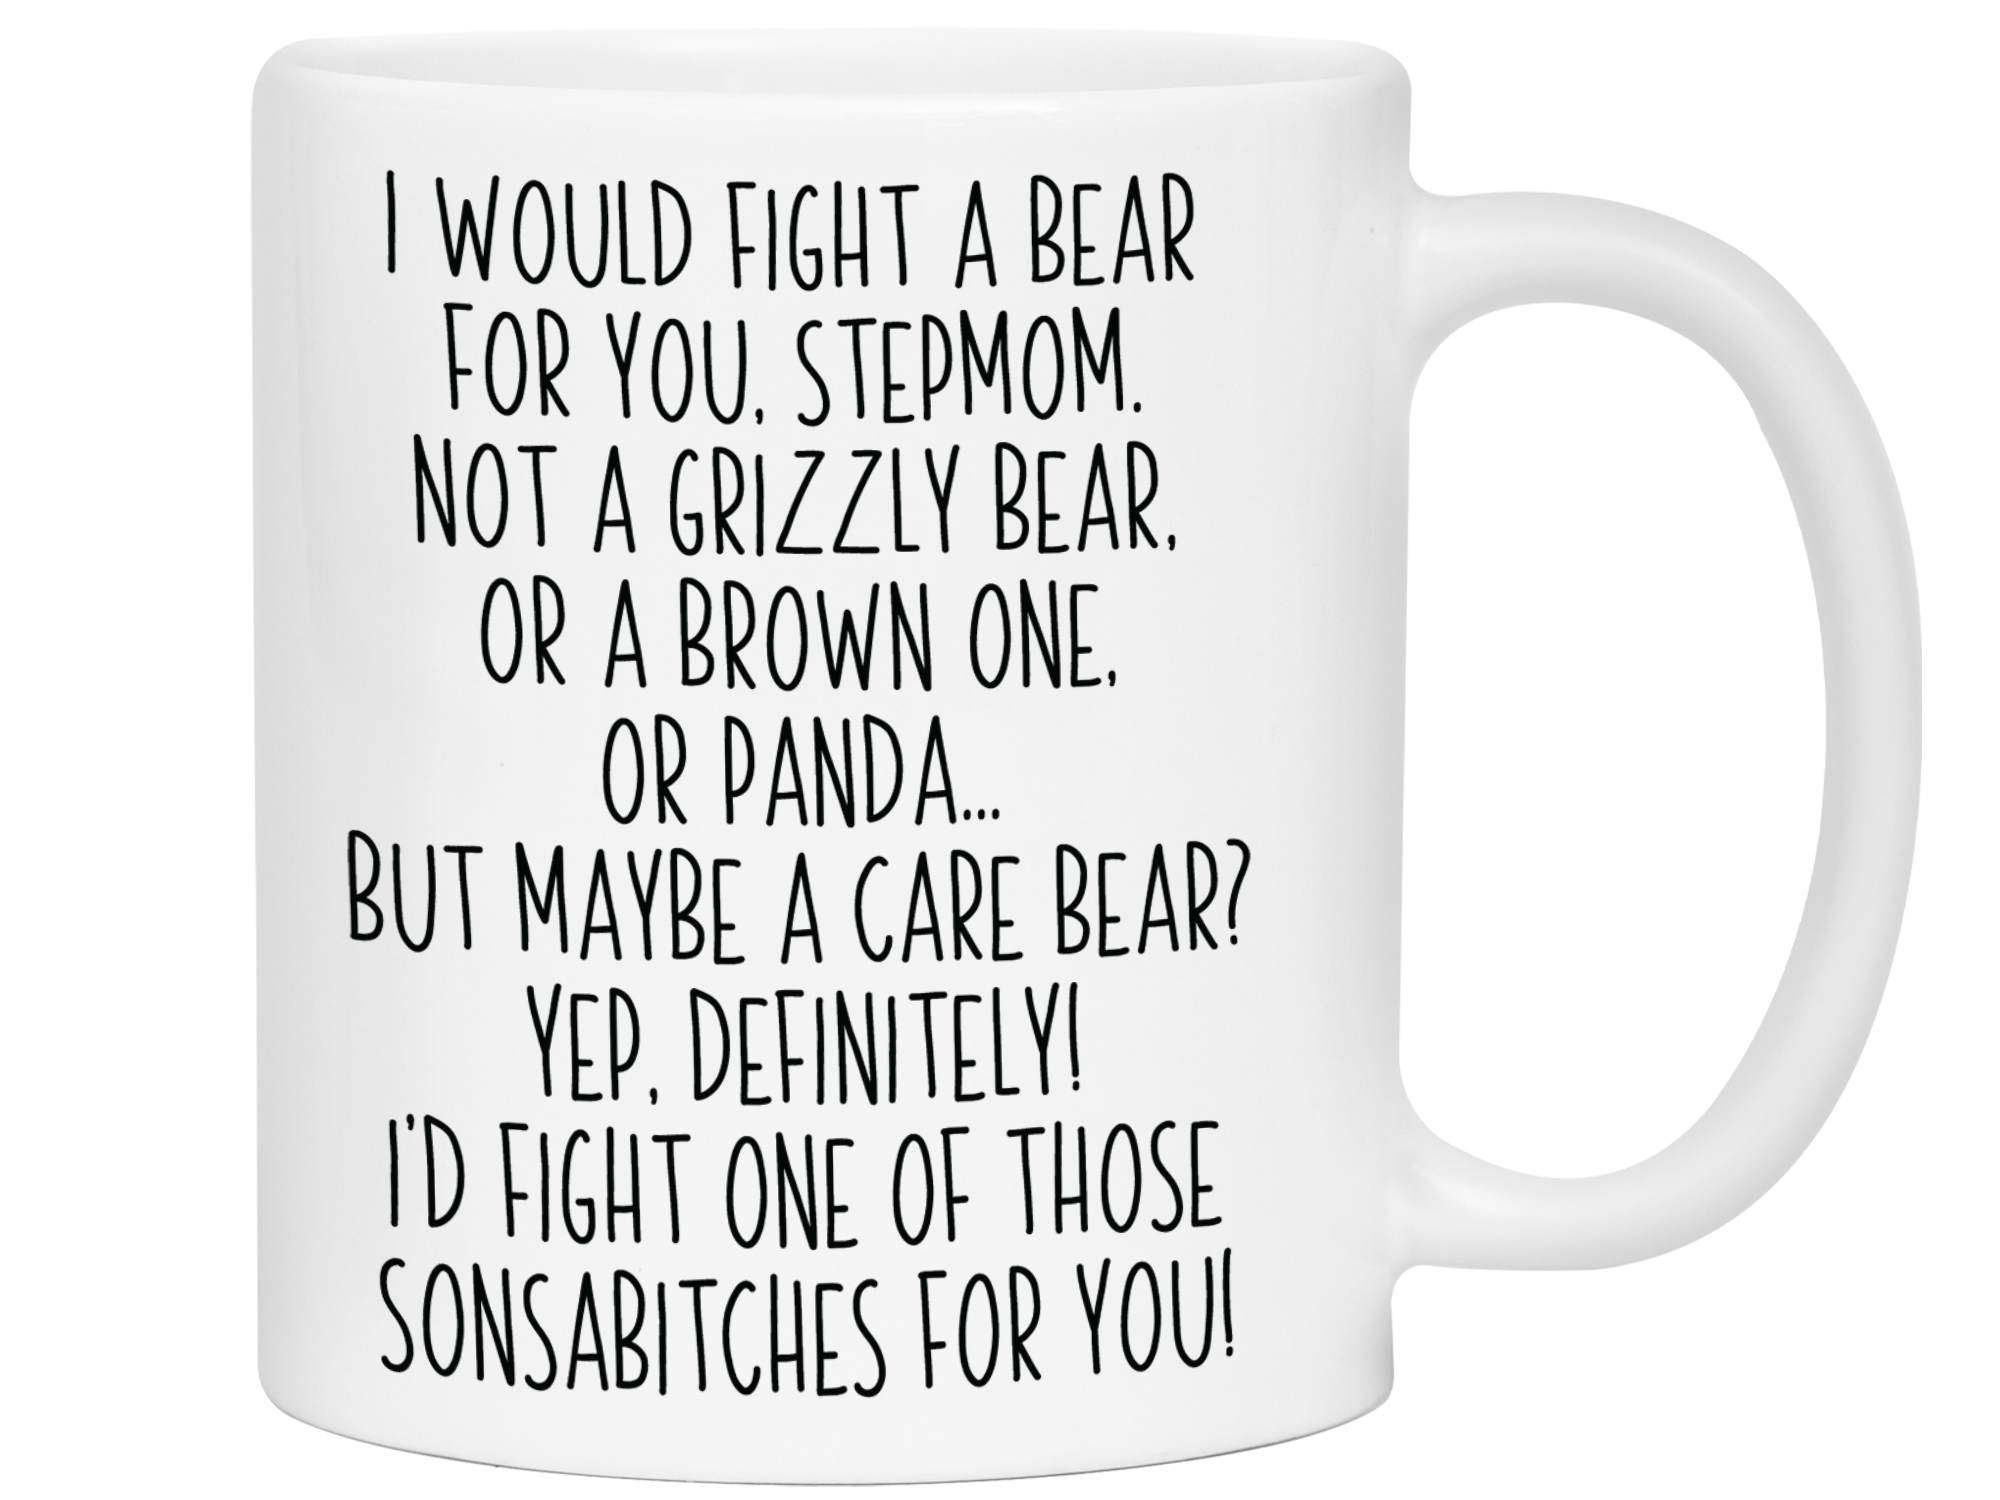 Funny Gifts for Stepmoms - I Would Fight a Bear for You Stepmom Gag Coffee Mug